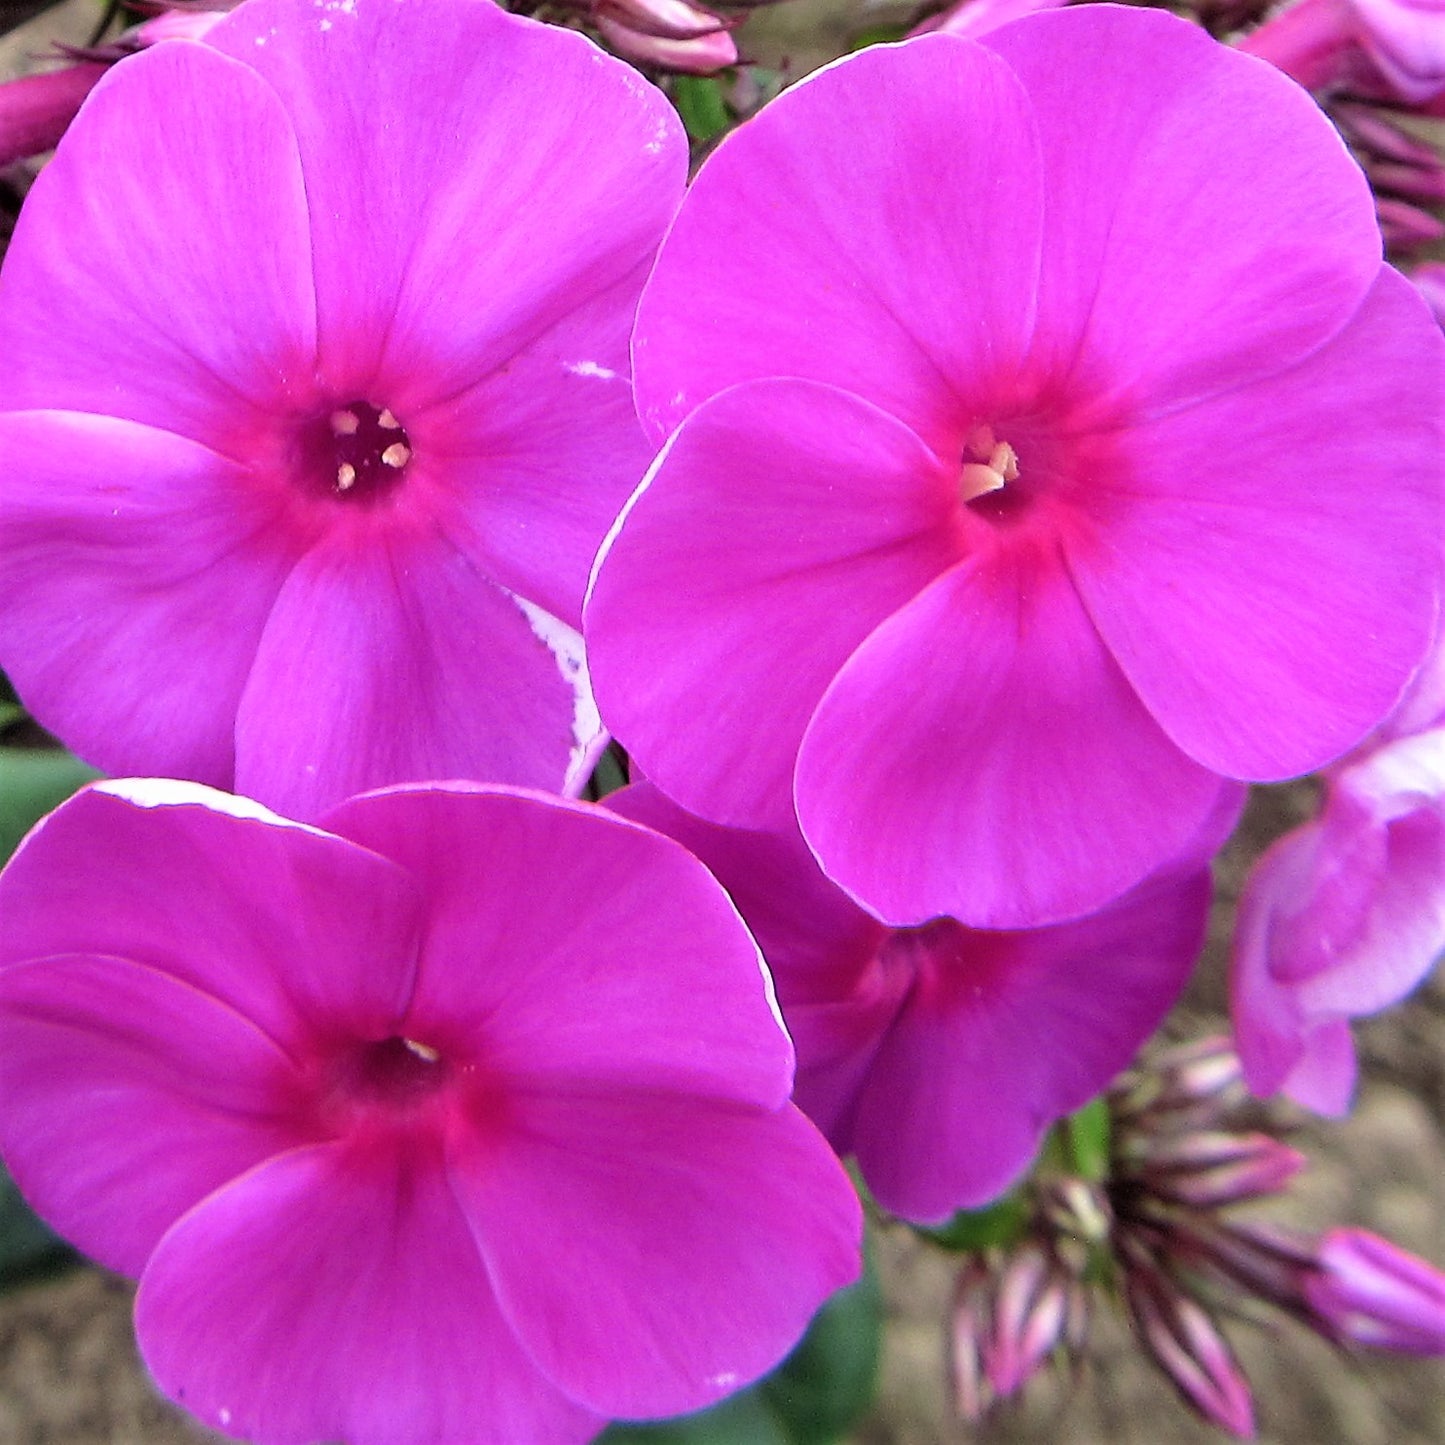 An up-close view of the bold "Purple Flame" Phlox